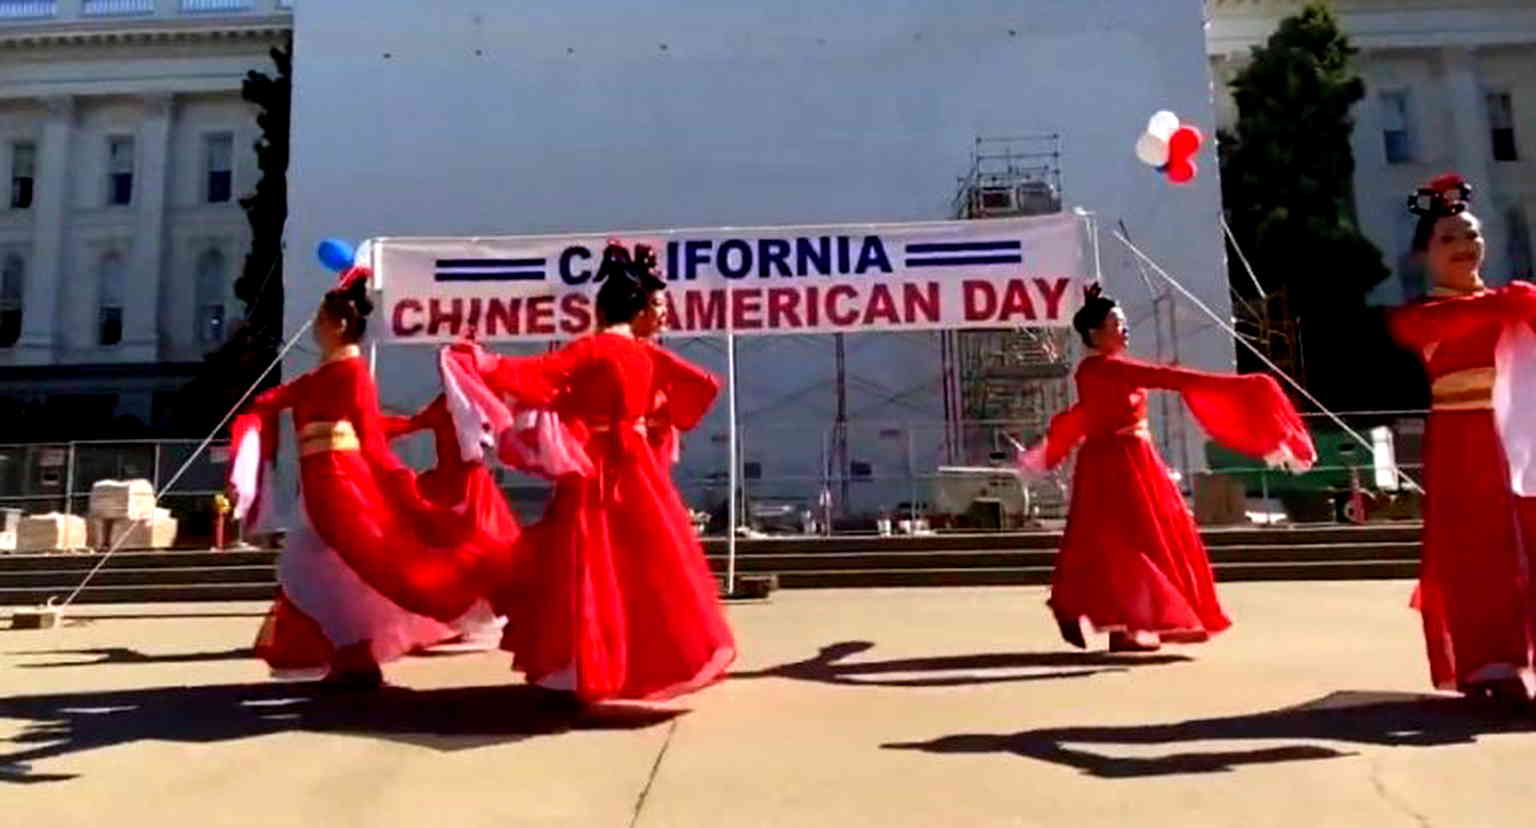 California Celebrated Its First Chinese American Day in Sacramento